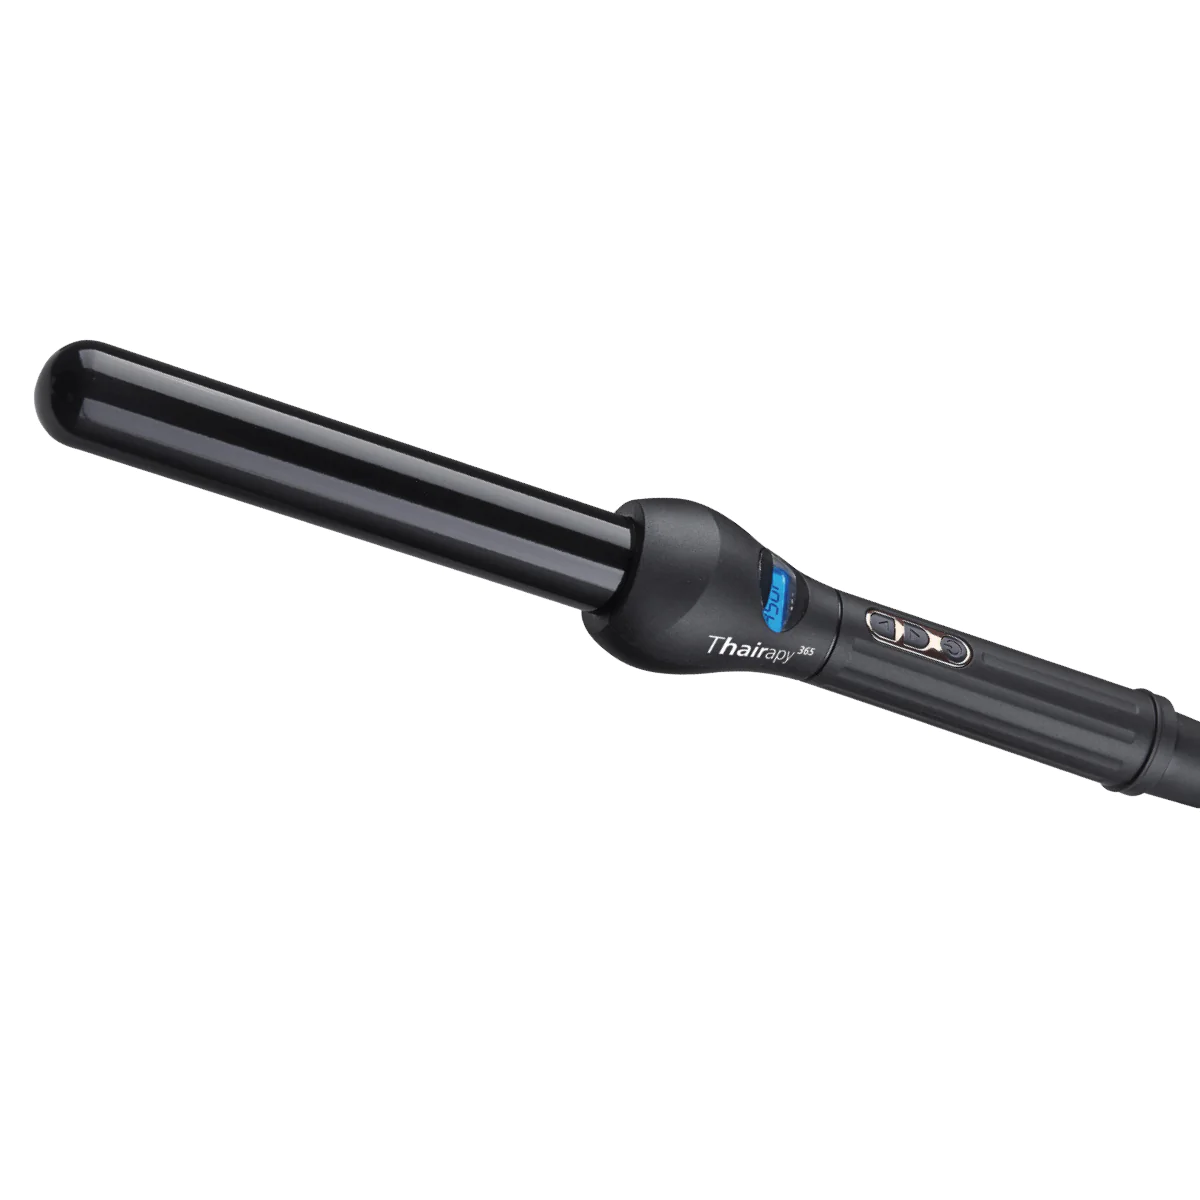 Salon-grade Curling Iron Dual Voltage Curling Iron Hair Styling Tool Hair Curling Tool Hair Waving Tool Heat Styling Tool Adjustable Temperature Curling Iron Fast Heating Curling Iron Tapered Curling Iron Barrel Curling Iron Long Barrel Curling Iron Short Barrel Curling Iron Easy-to-use Curling Iron Versatile Curling Iron.